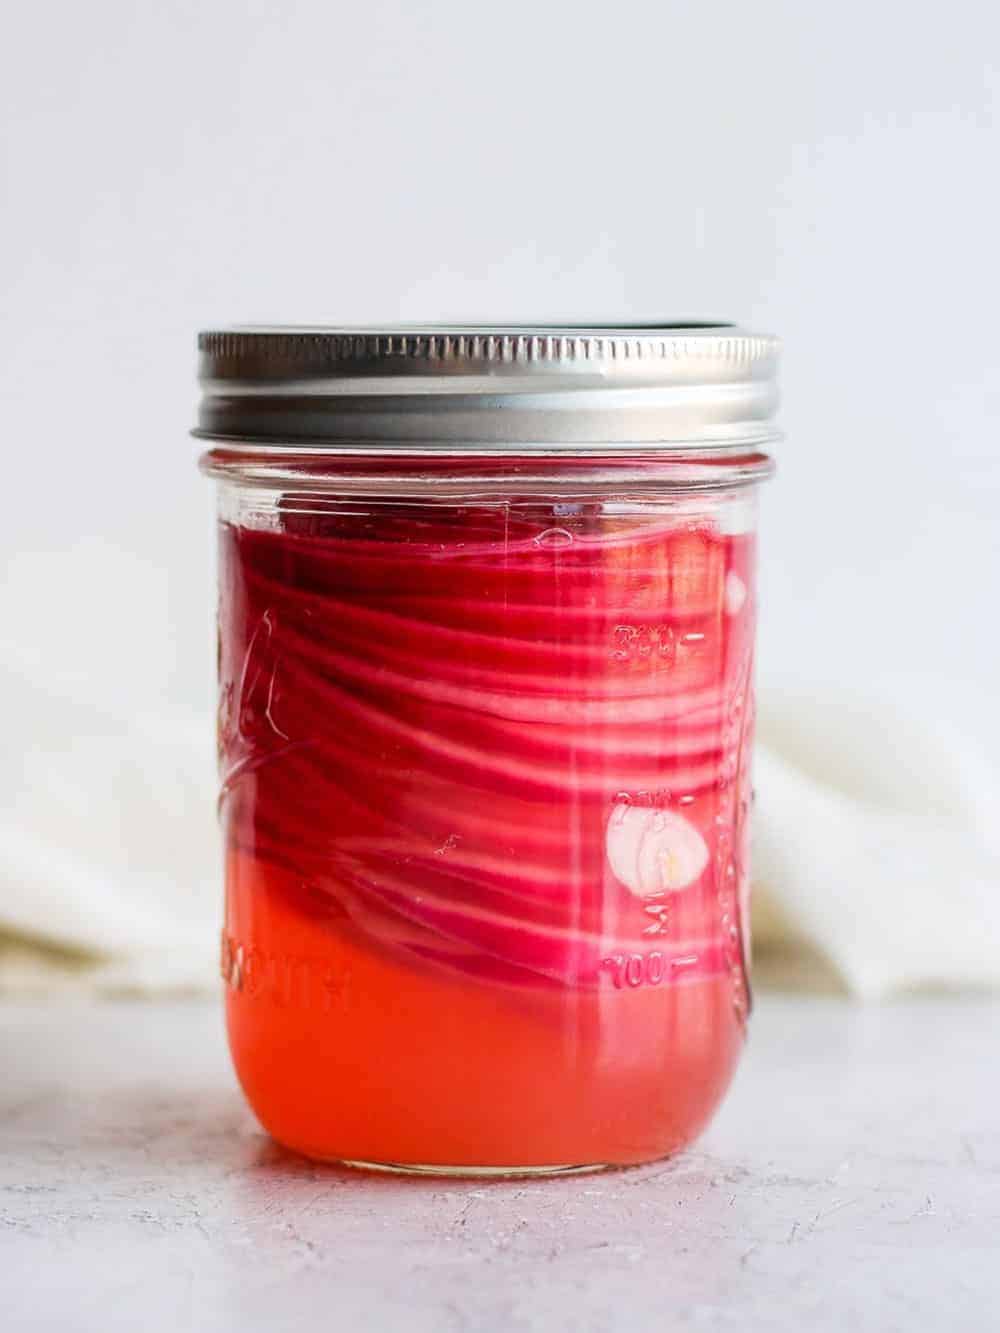 How to Make Quick Pickled Onions - Fit Foodie Finds